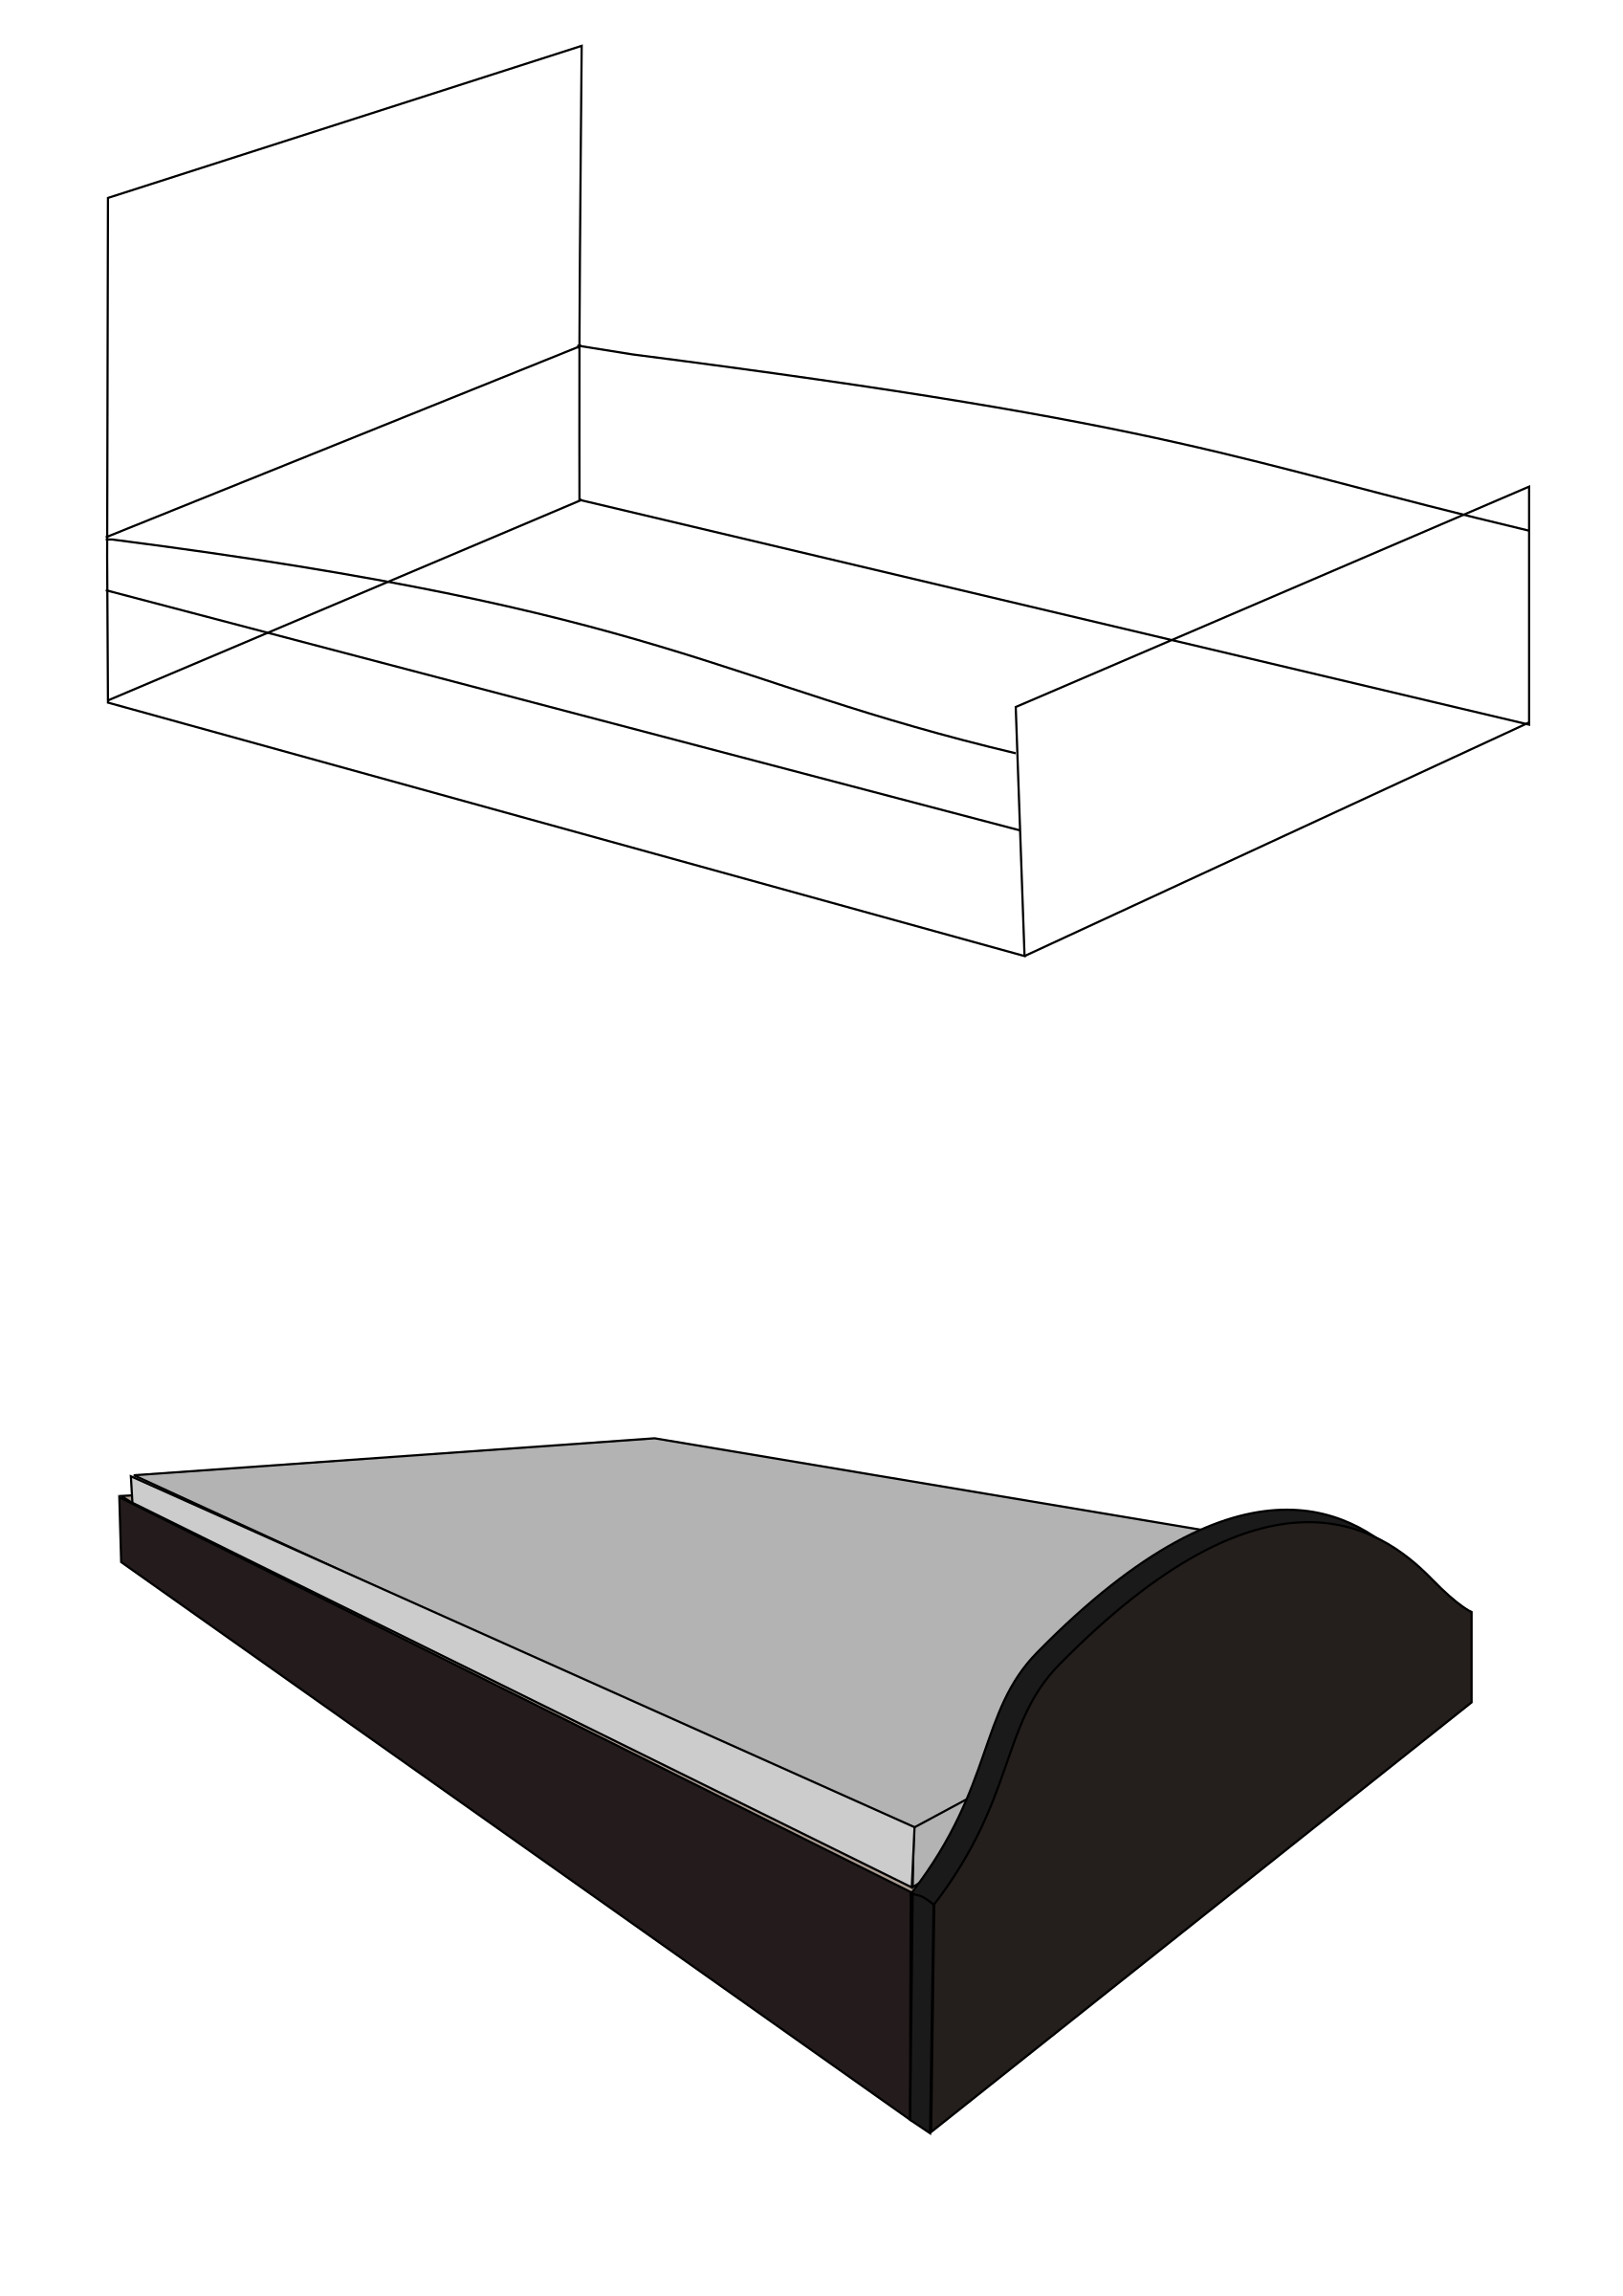 D no background big. Clipart bed rectangle